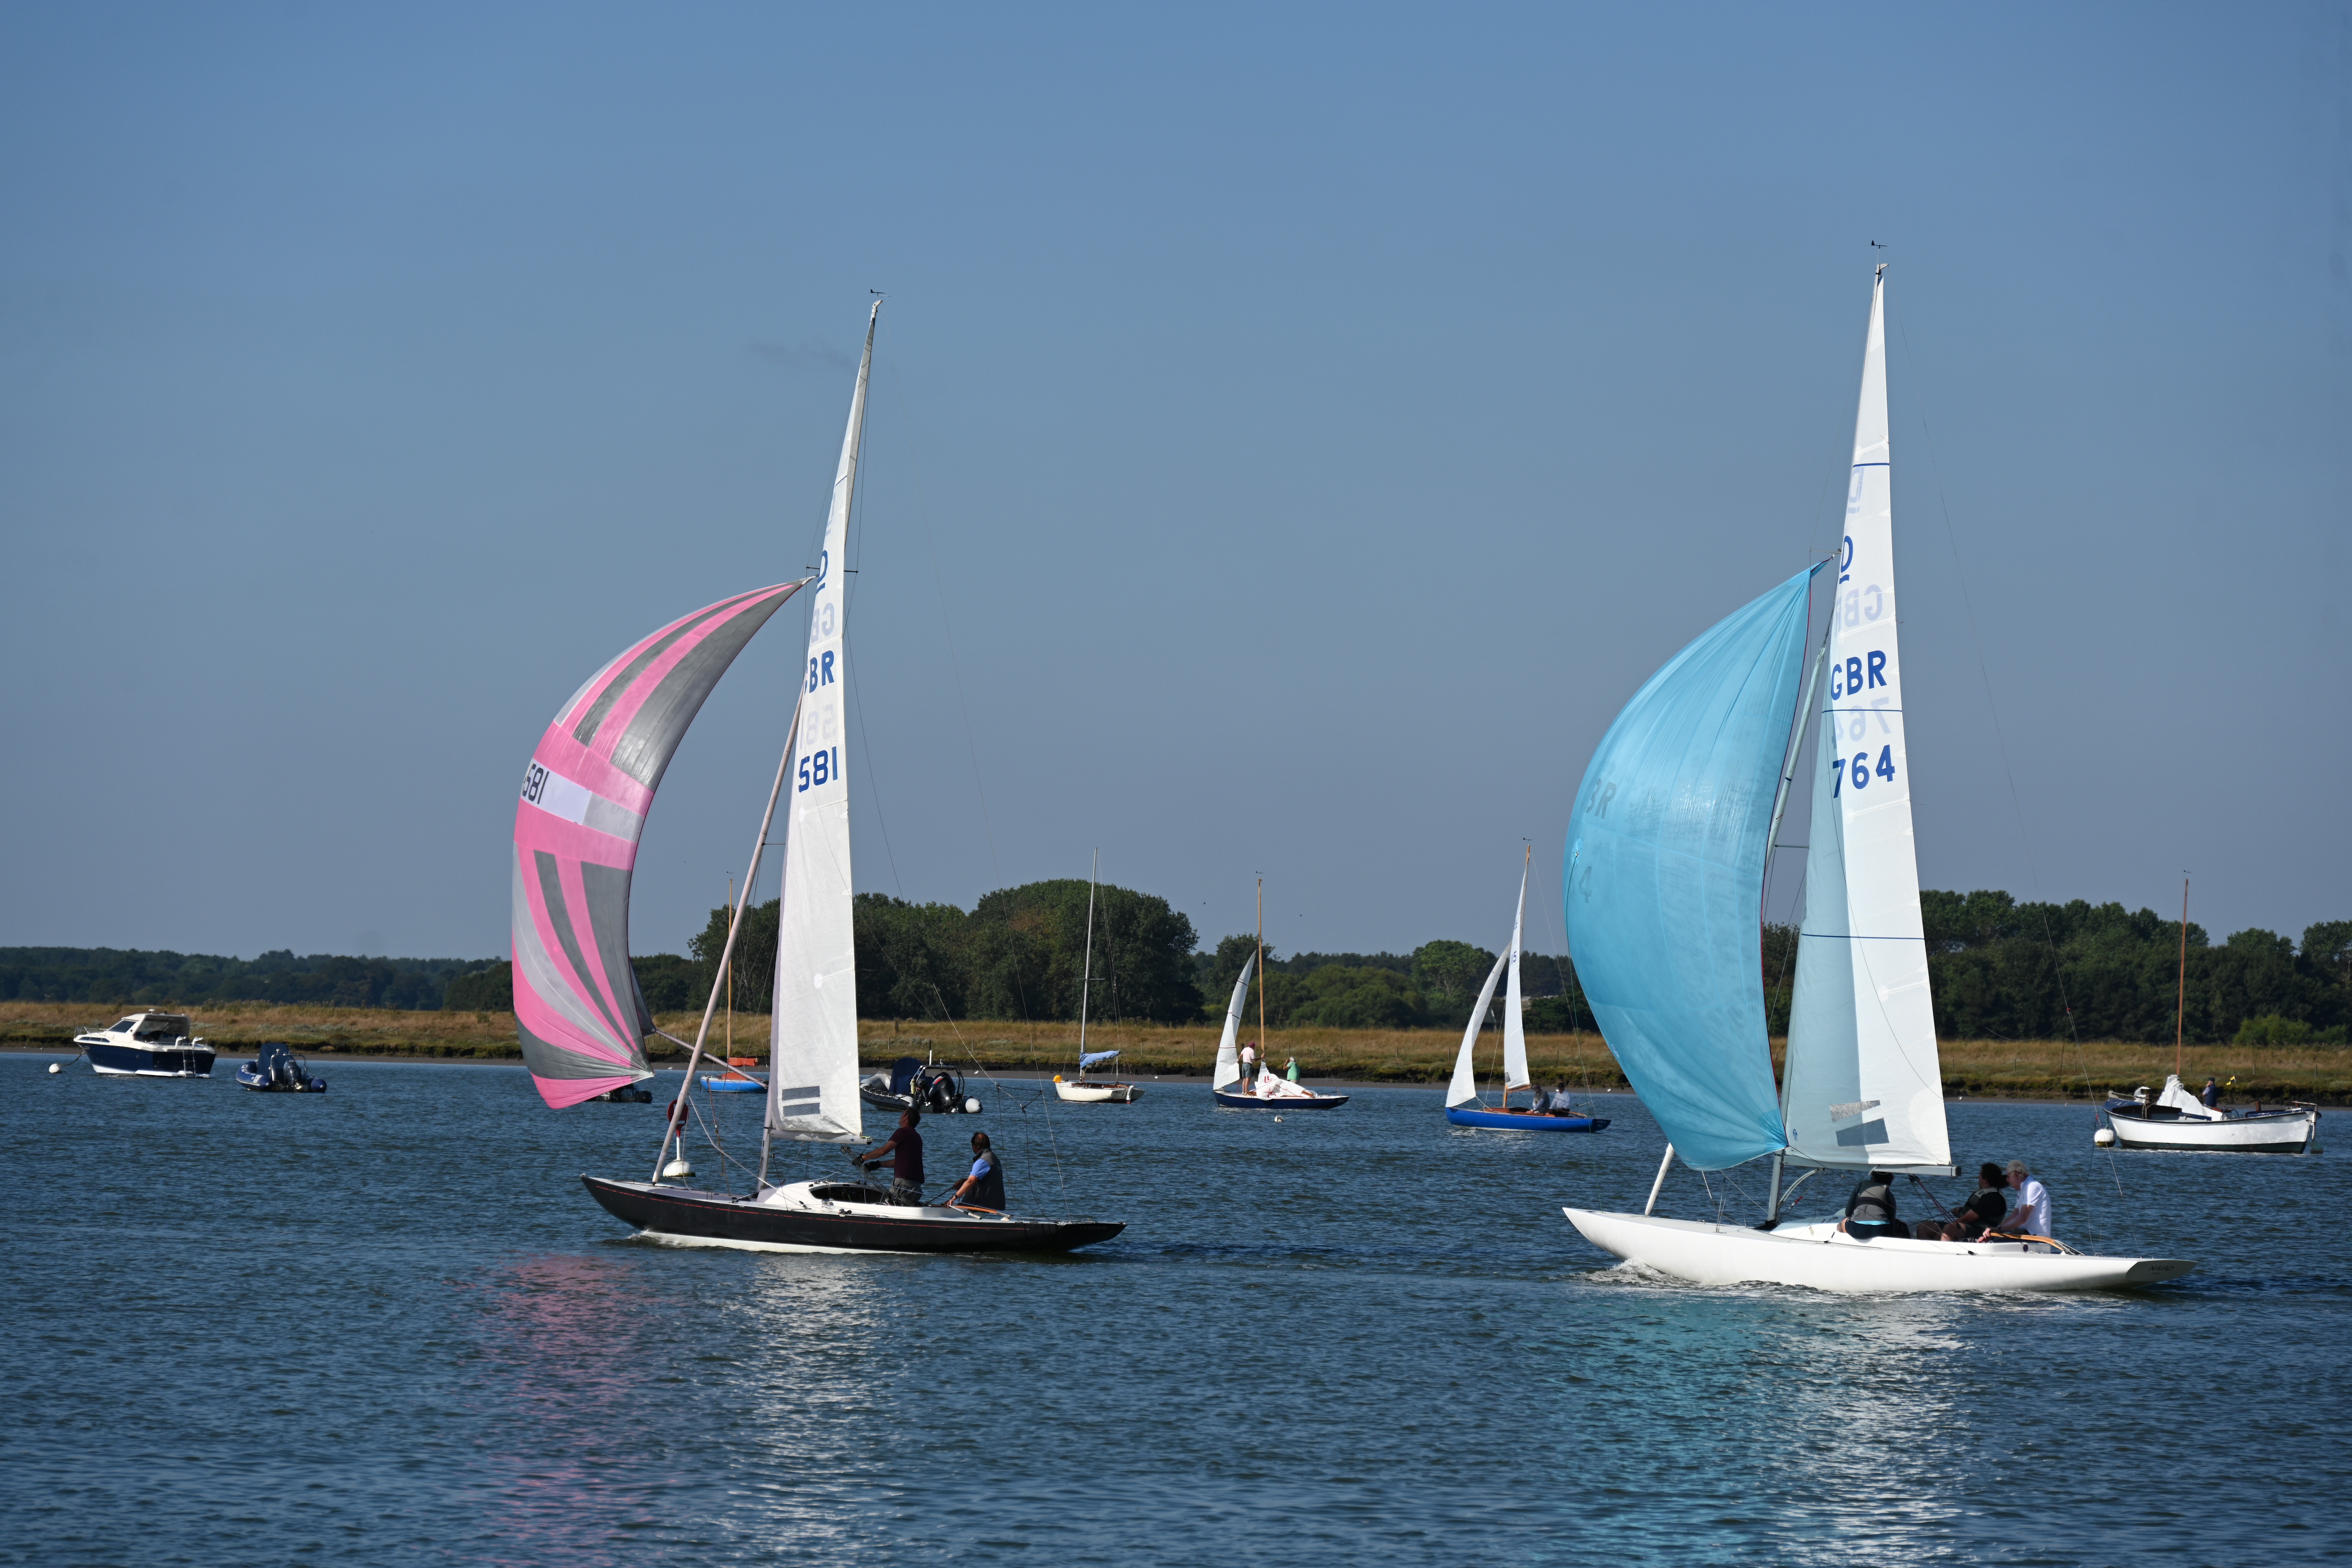 dragon keelboats with pink and blue spinnakers on the water in Aldeburgh